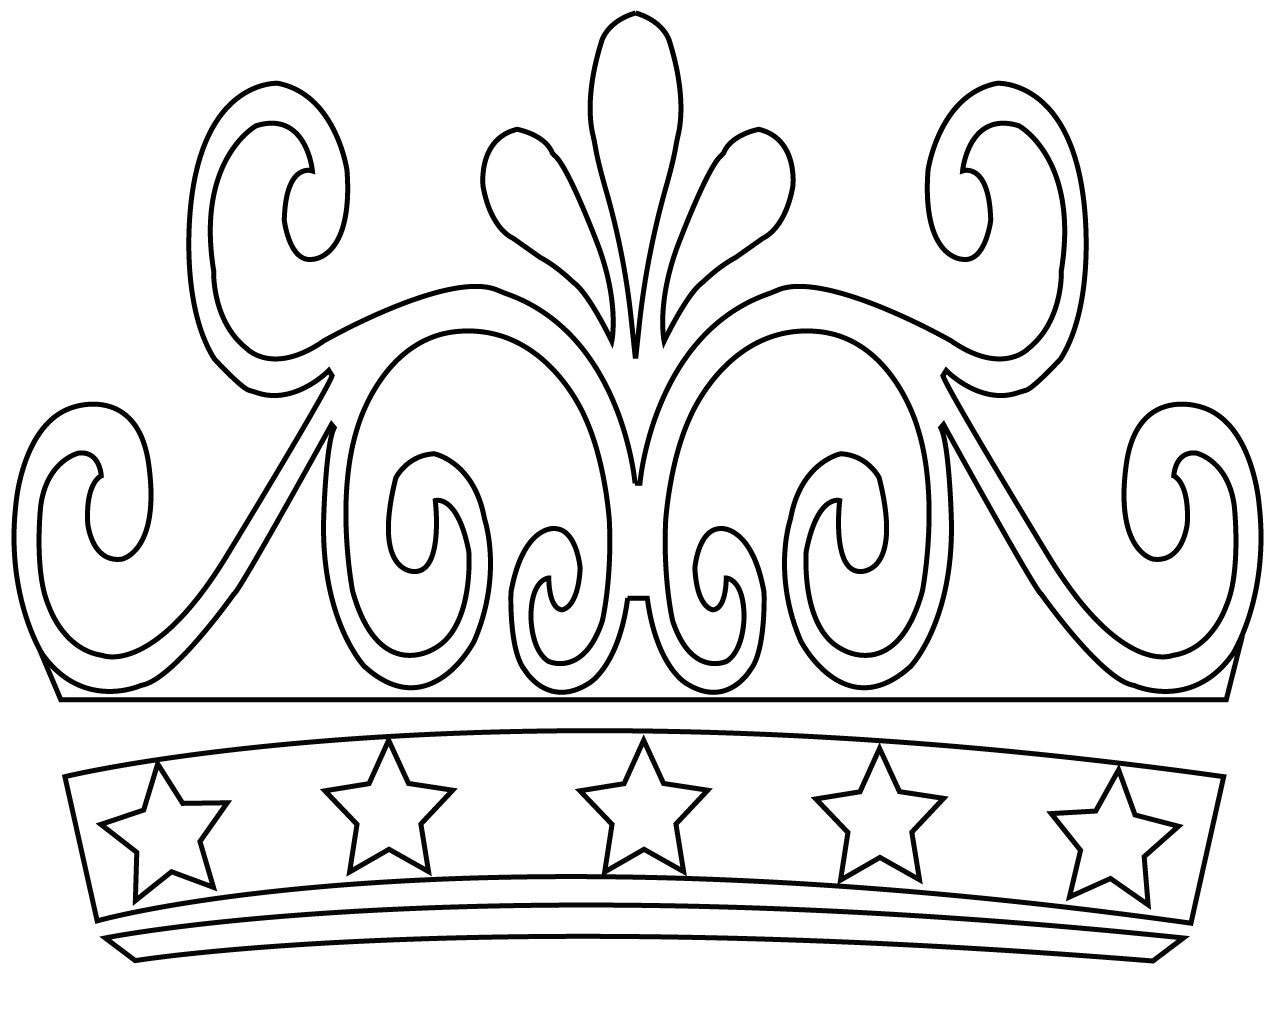 Download Crown Coloring Pages To Print, Simple, Birthday, Princess ...